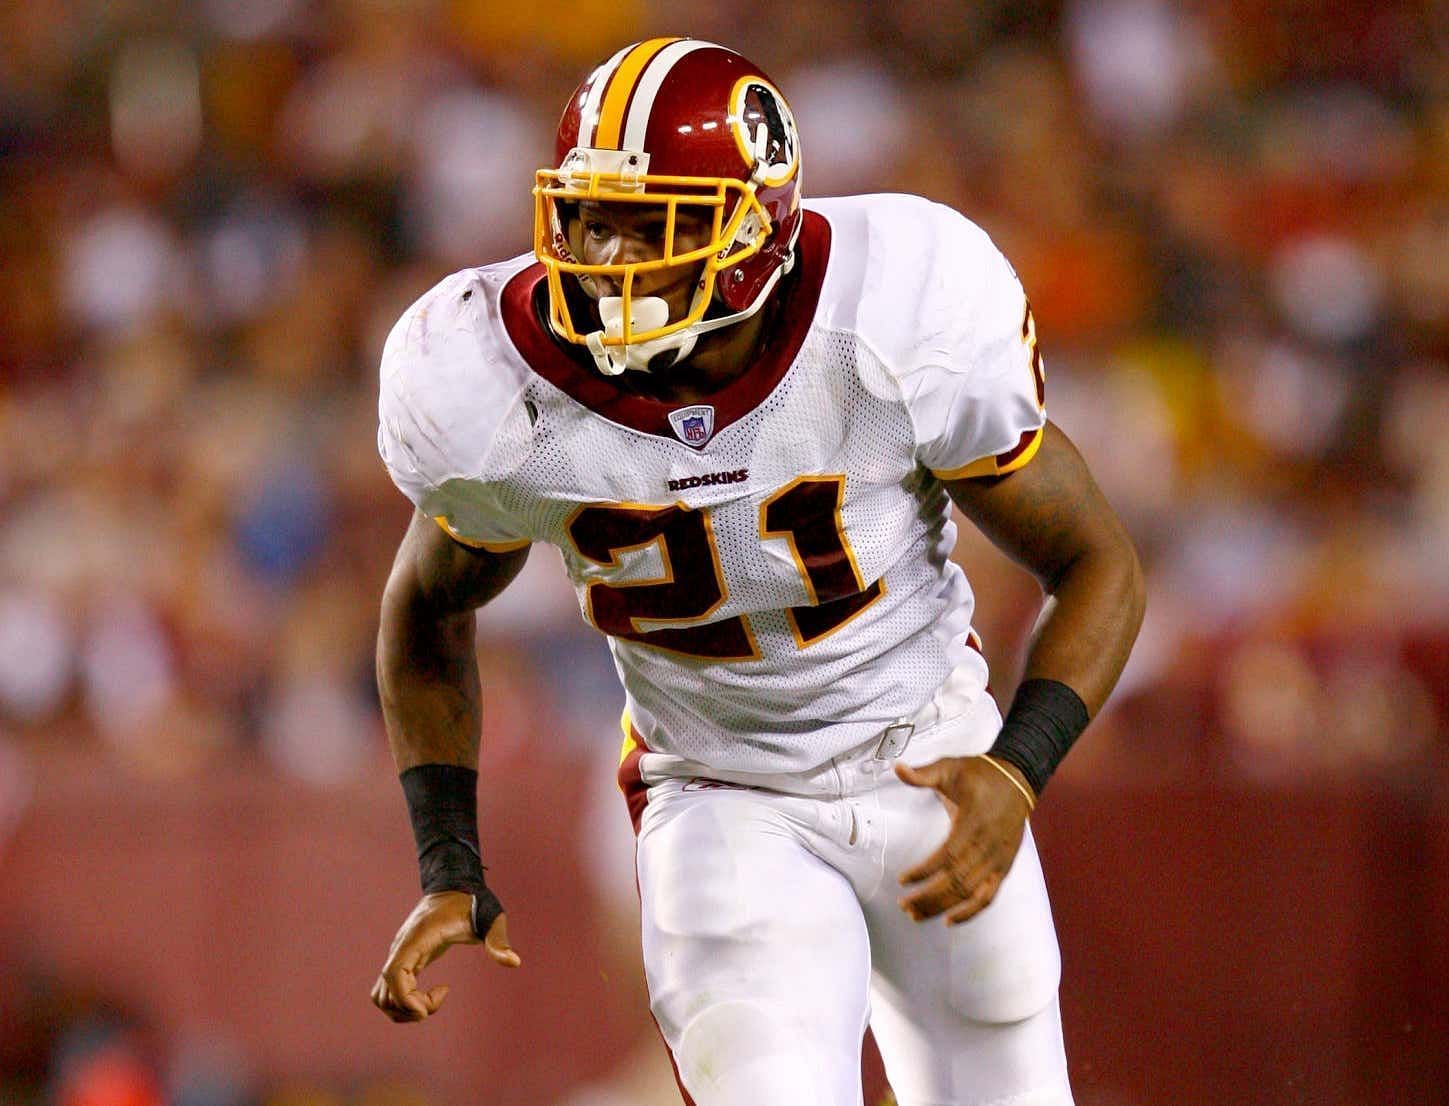 The late Sean Taylor will have his jersey retired. Picture via Barstool Sports Twitter